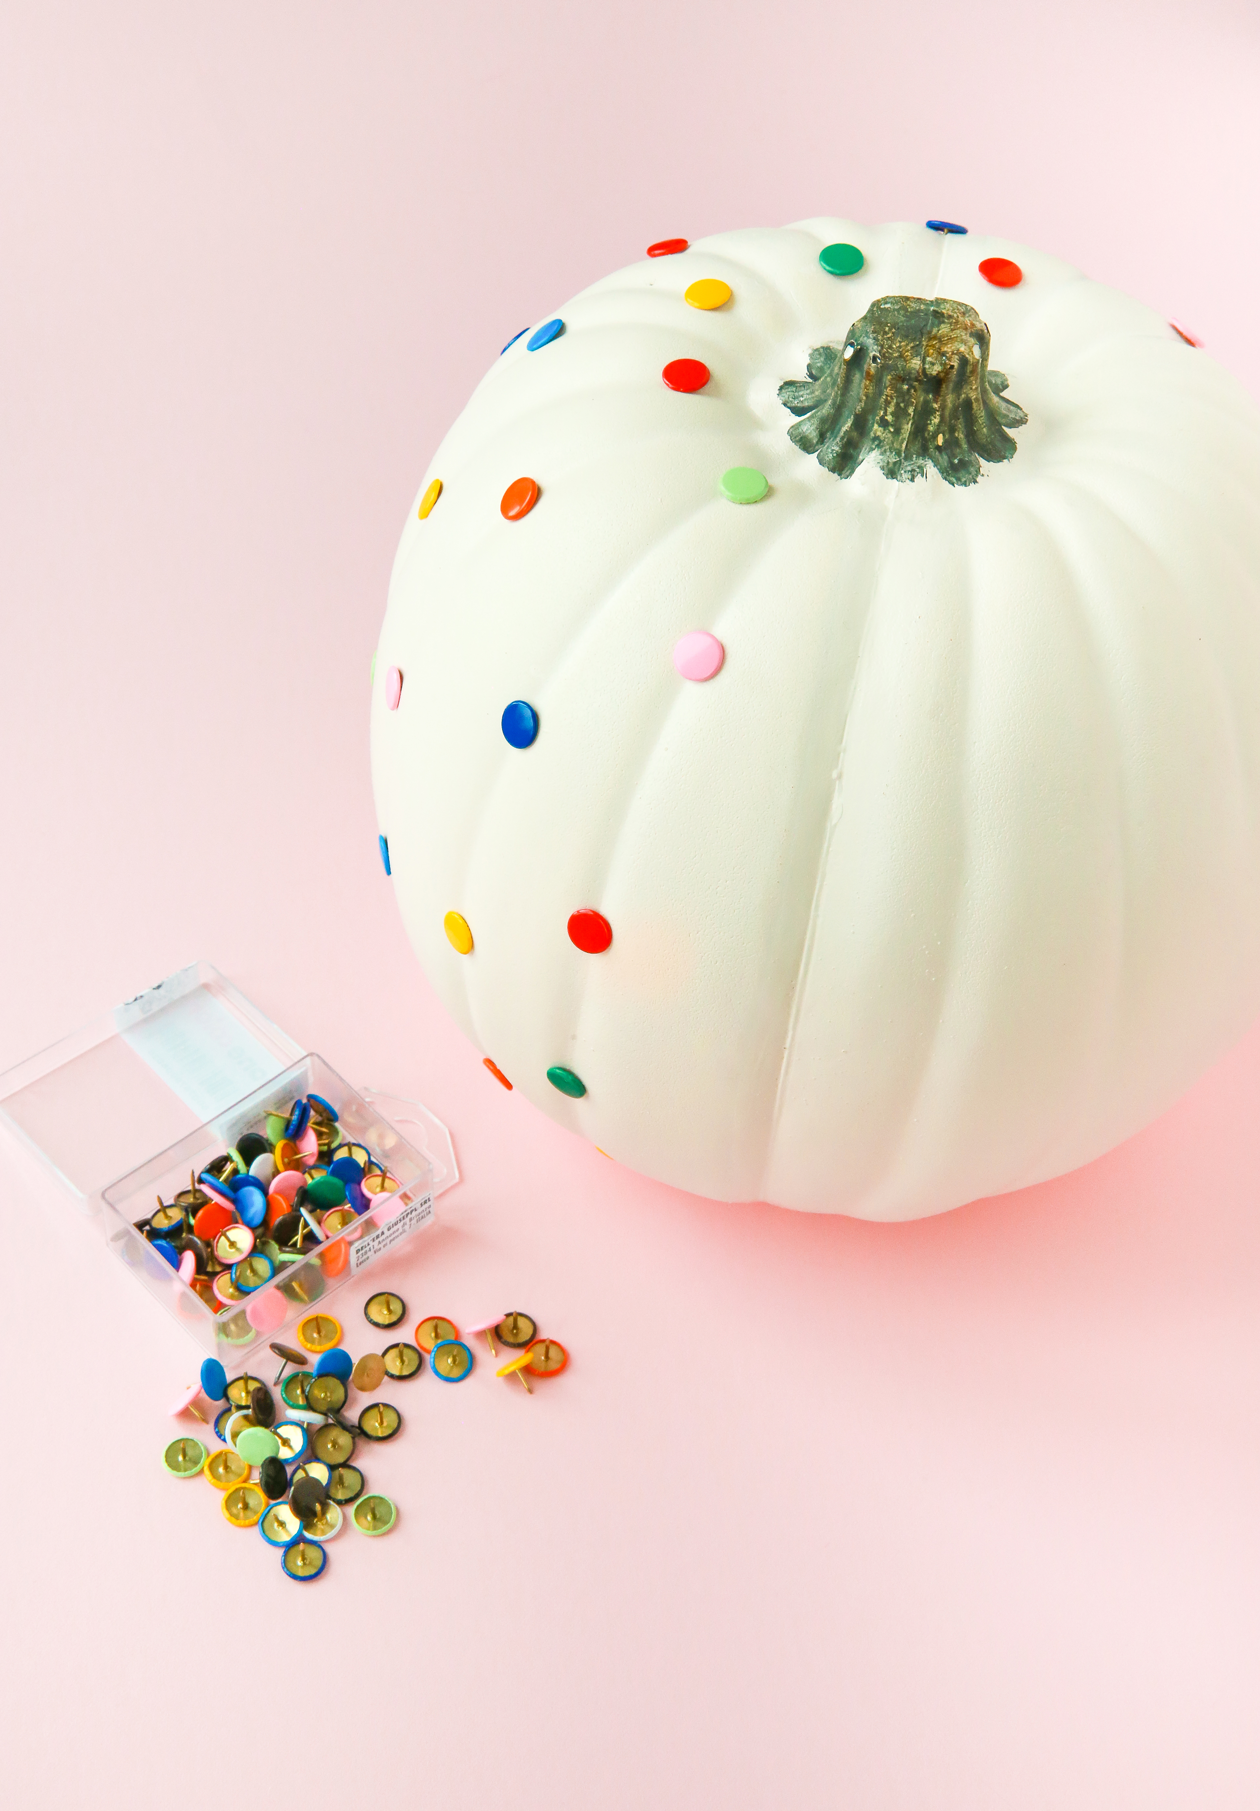 Looking for ways to decorate pumpkins for Halloween or fall? Make this DIY Push Pin Pumpkin in a few minutes! It's cute, colorful, functional, and perfect for Halloween!